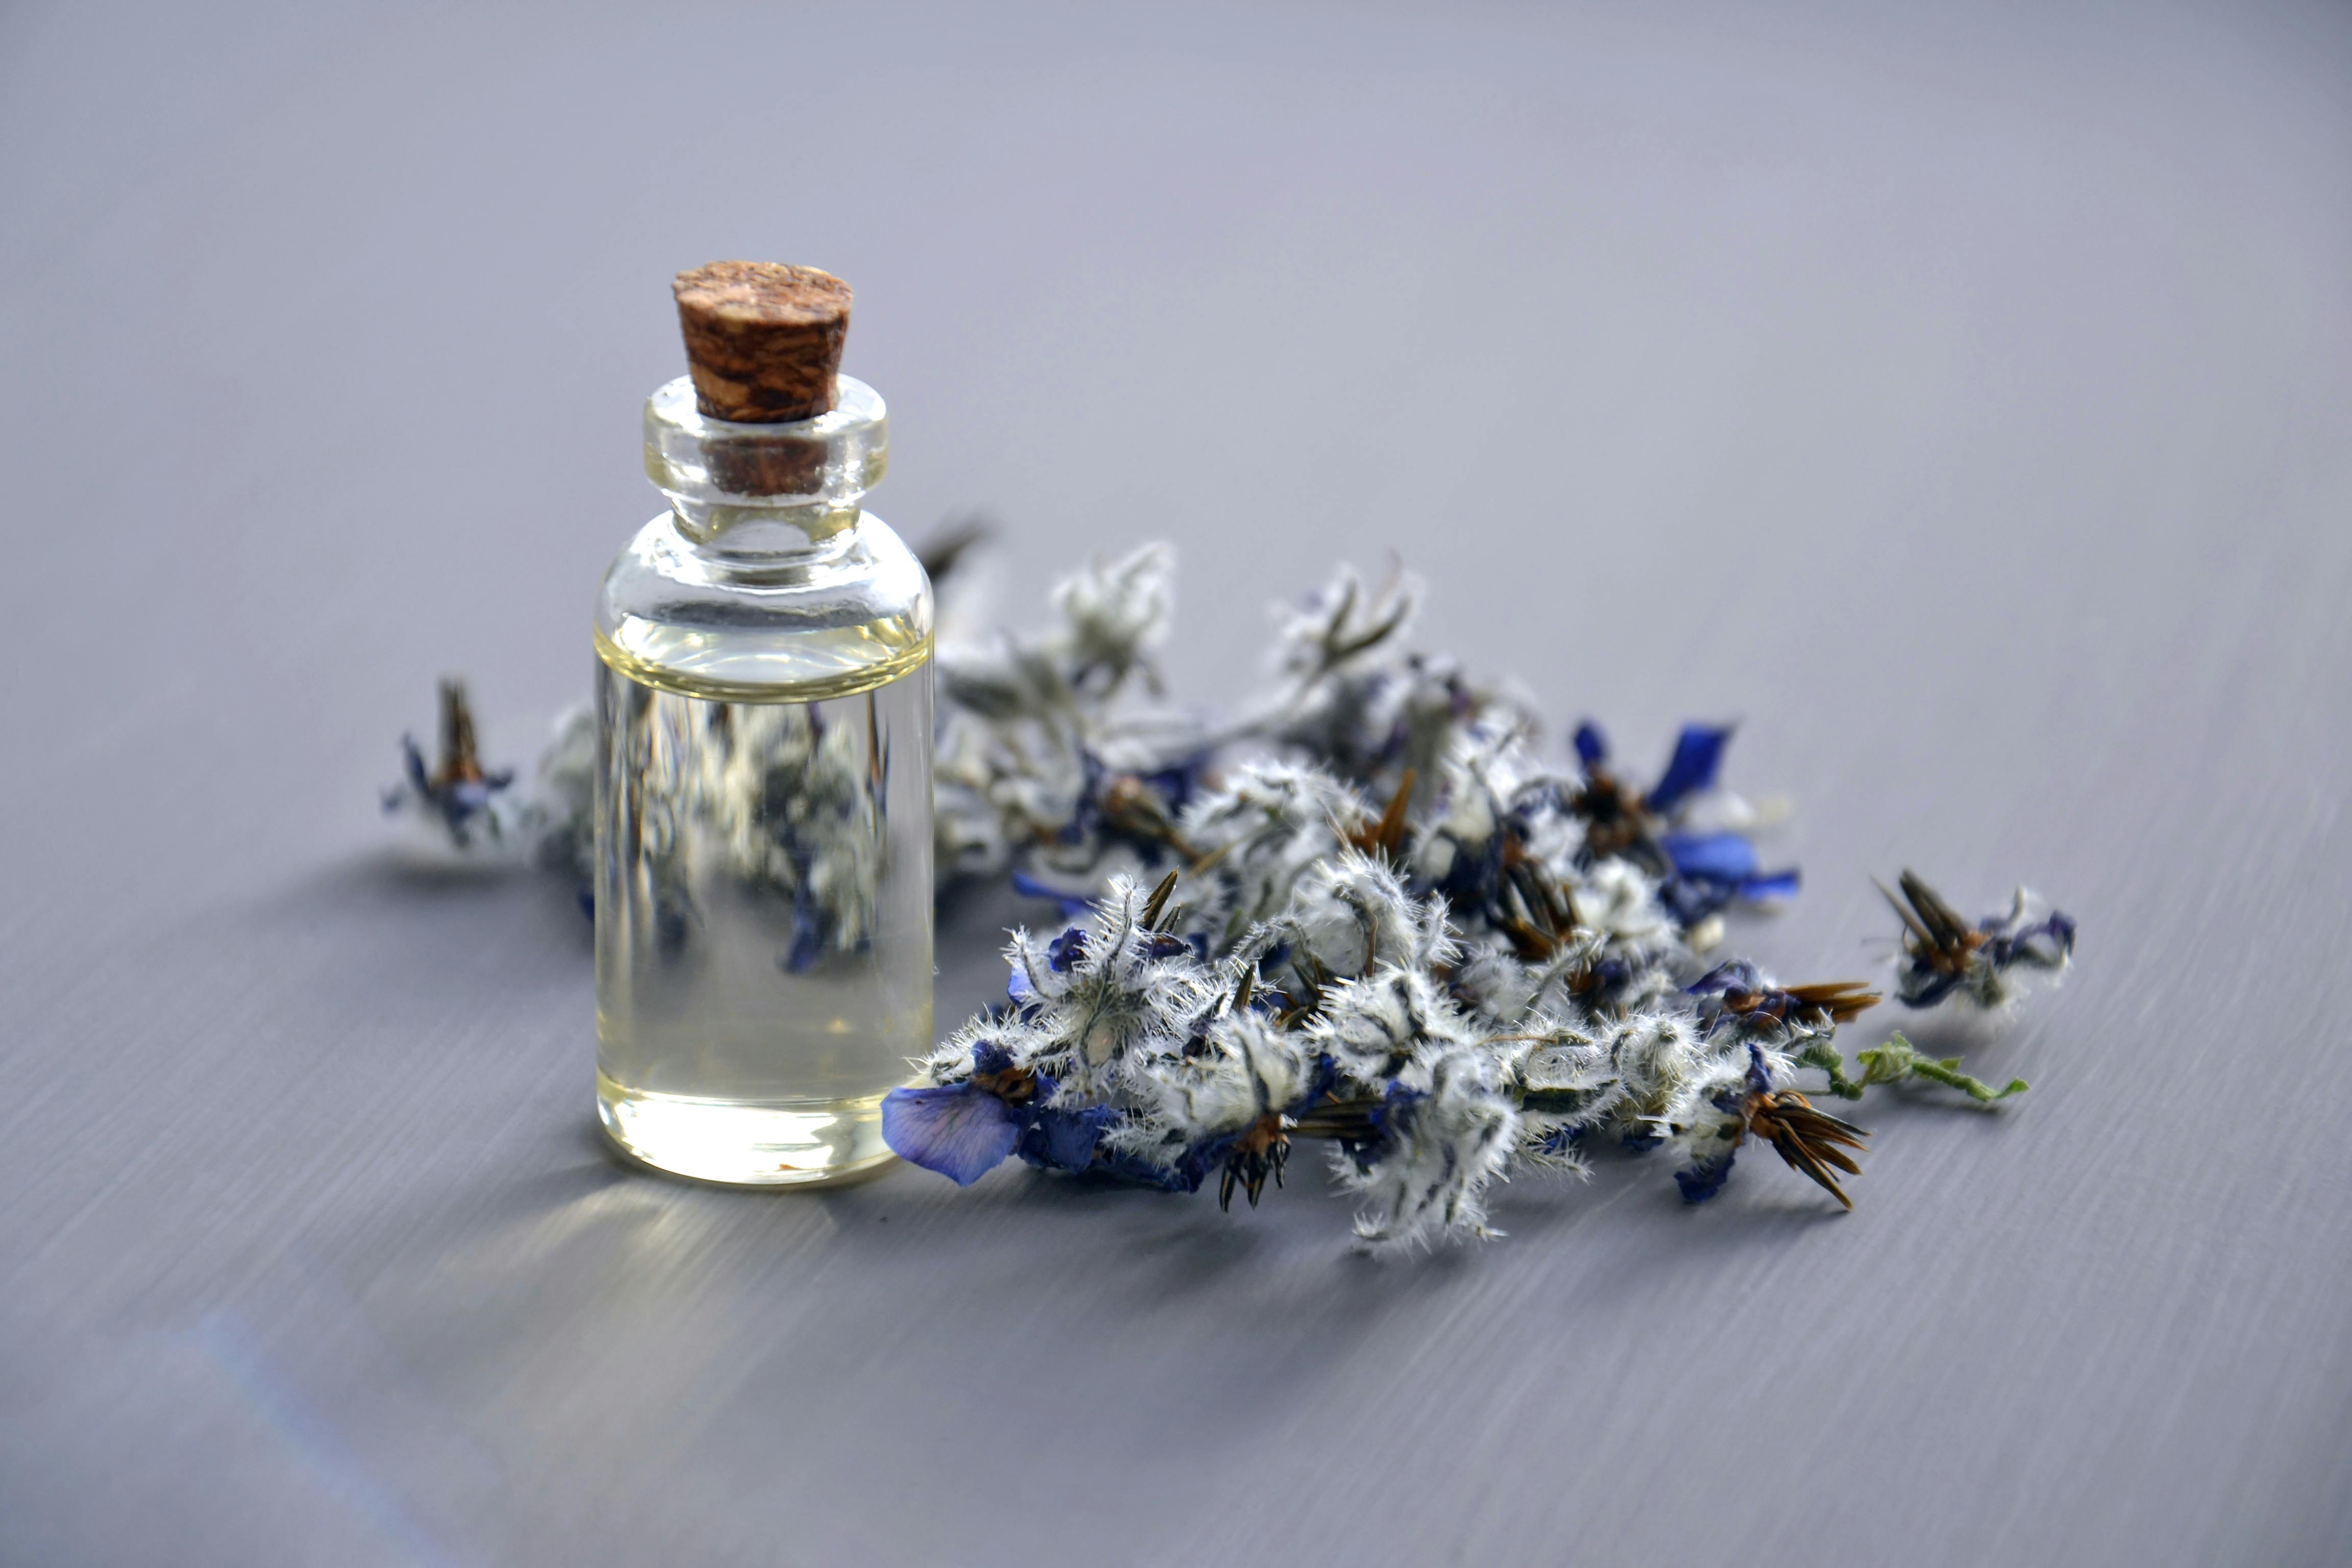 Lilac Essential Oil In A Small Bottle Selective Focus High-Res Stock Photo  - Getty Images